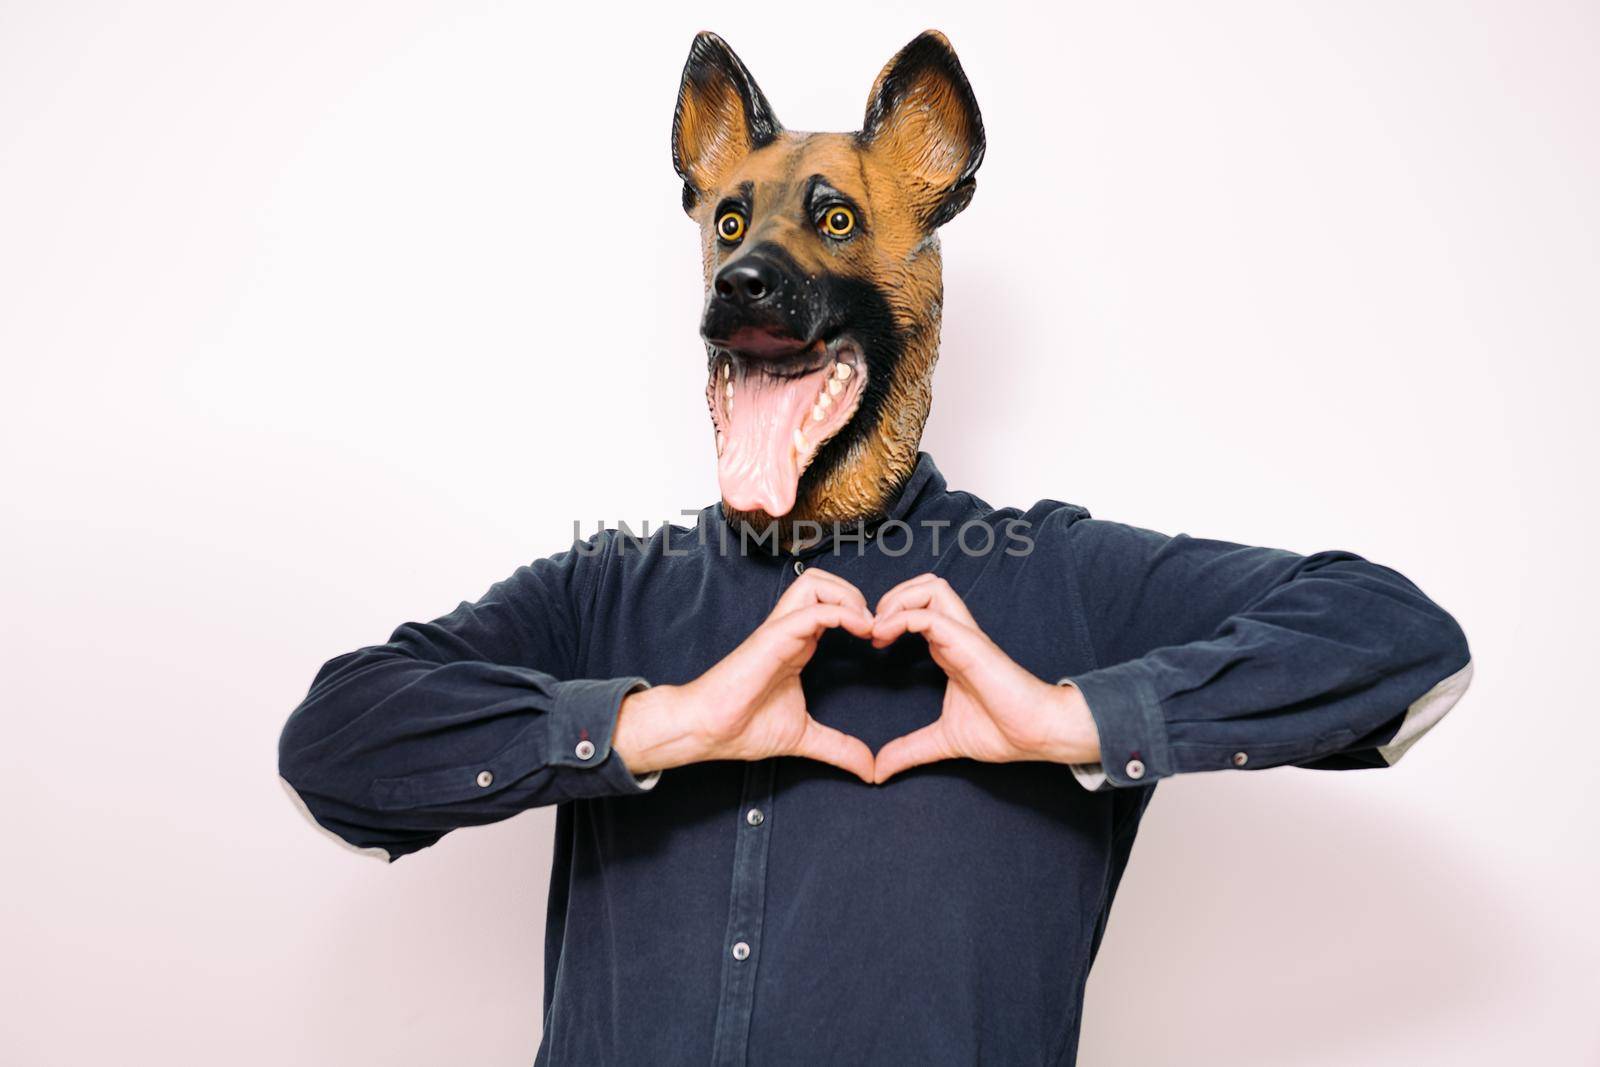 person disguised with a dog mask making a heart shape with his hands as a sign of affection on white background, concept of love for pets